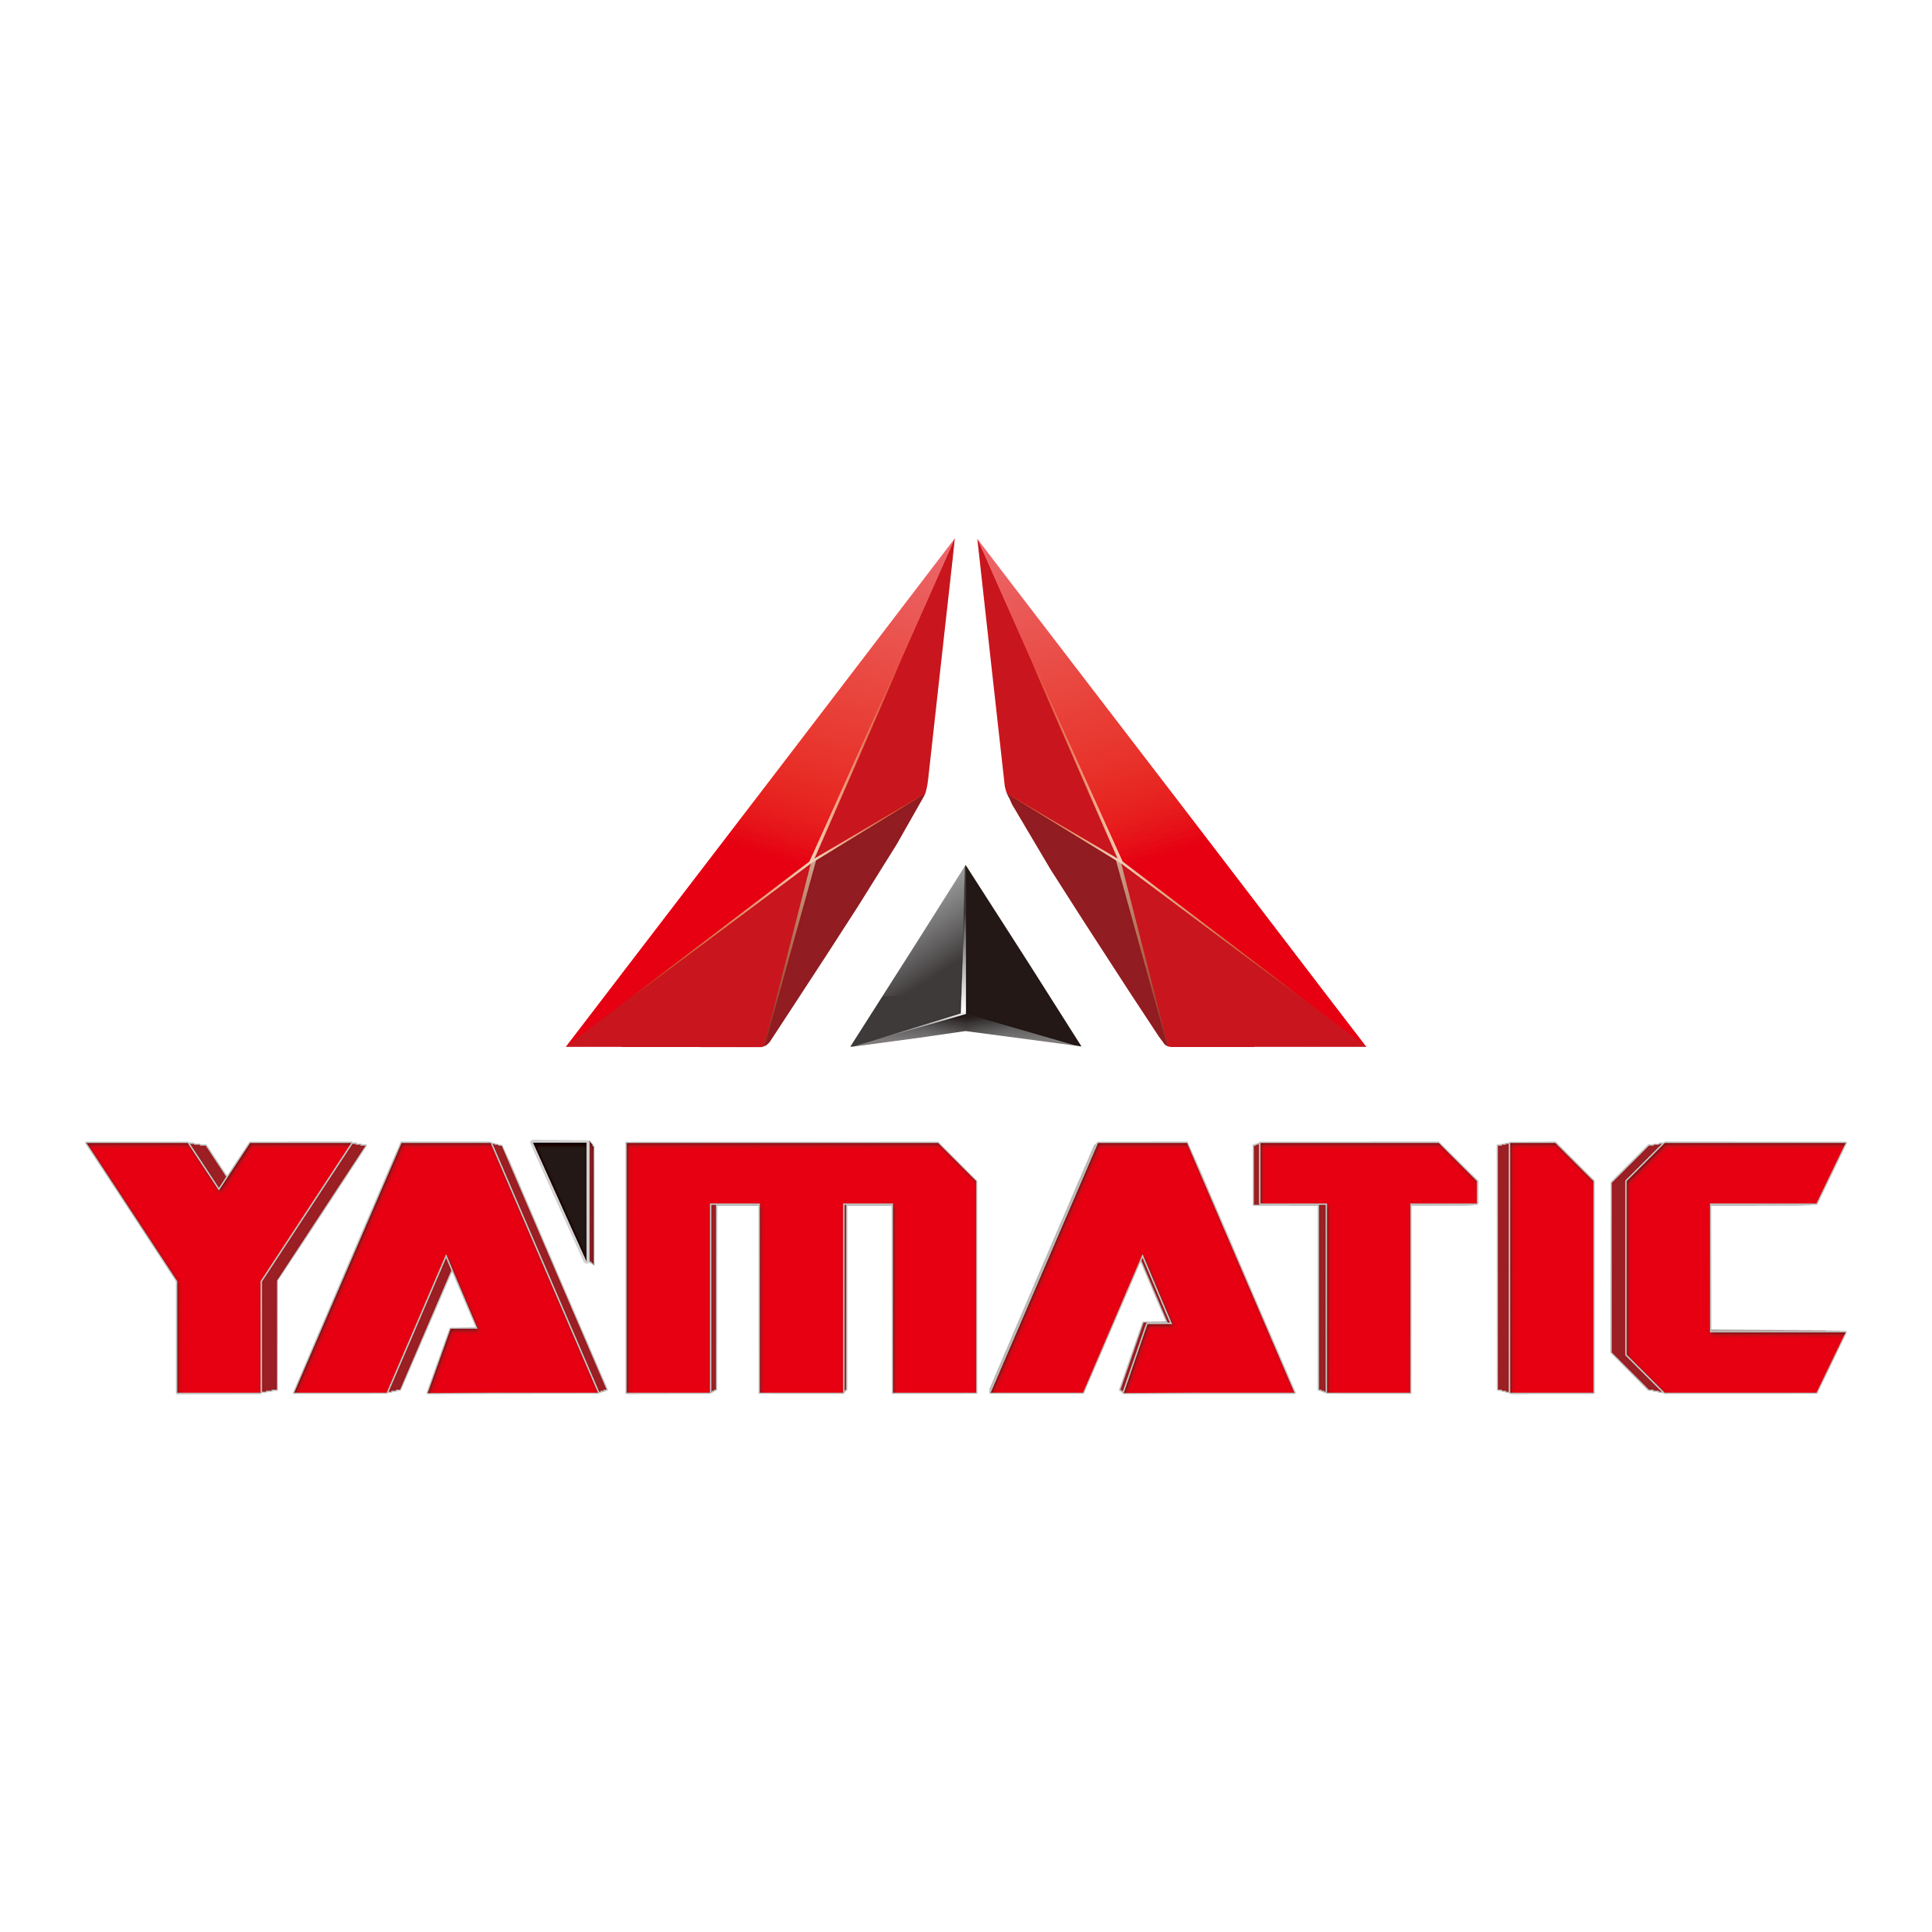 Yamatic Power Coupon Codes